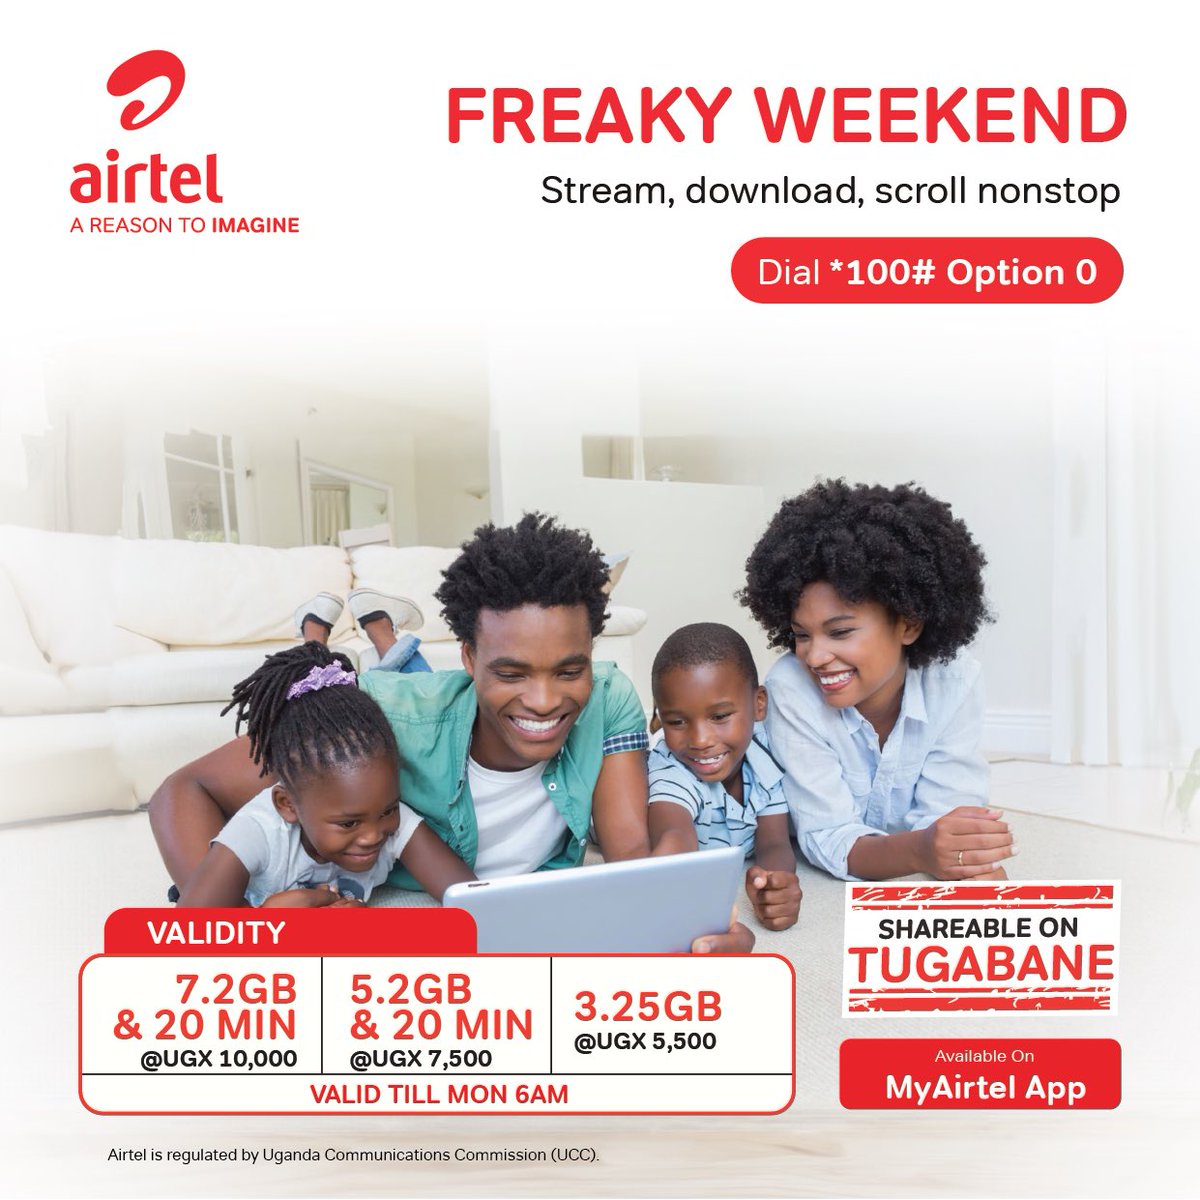 Use your #FreakyWeekend bundle to keep the 'fam' engaged. Dial *100# or get your bundle on #MyAirtelApp airtelafrica.onelink.me/cGyr/qgj4qeu2 for uninterrupted fun!